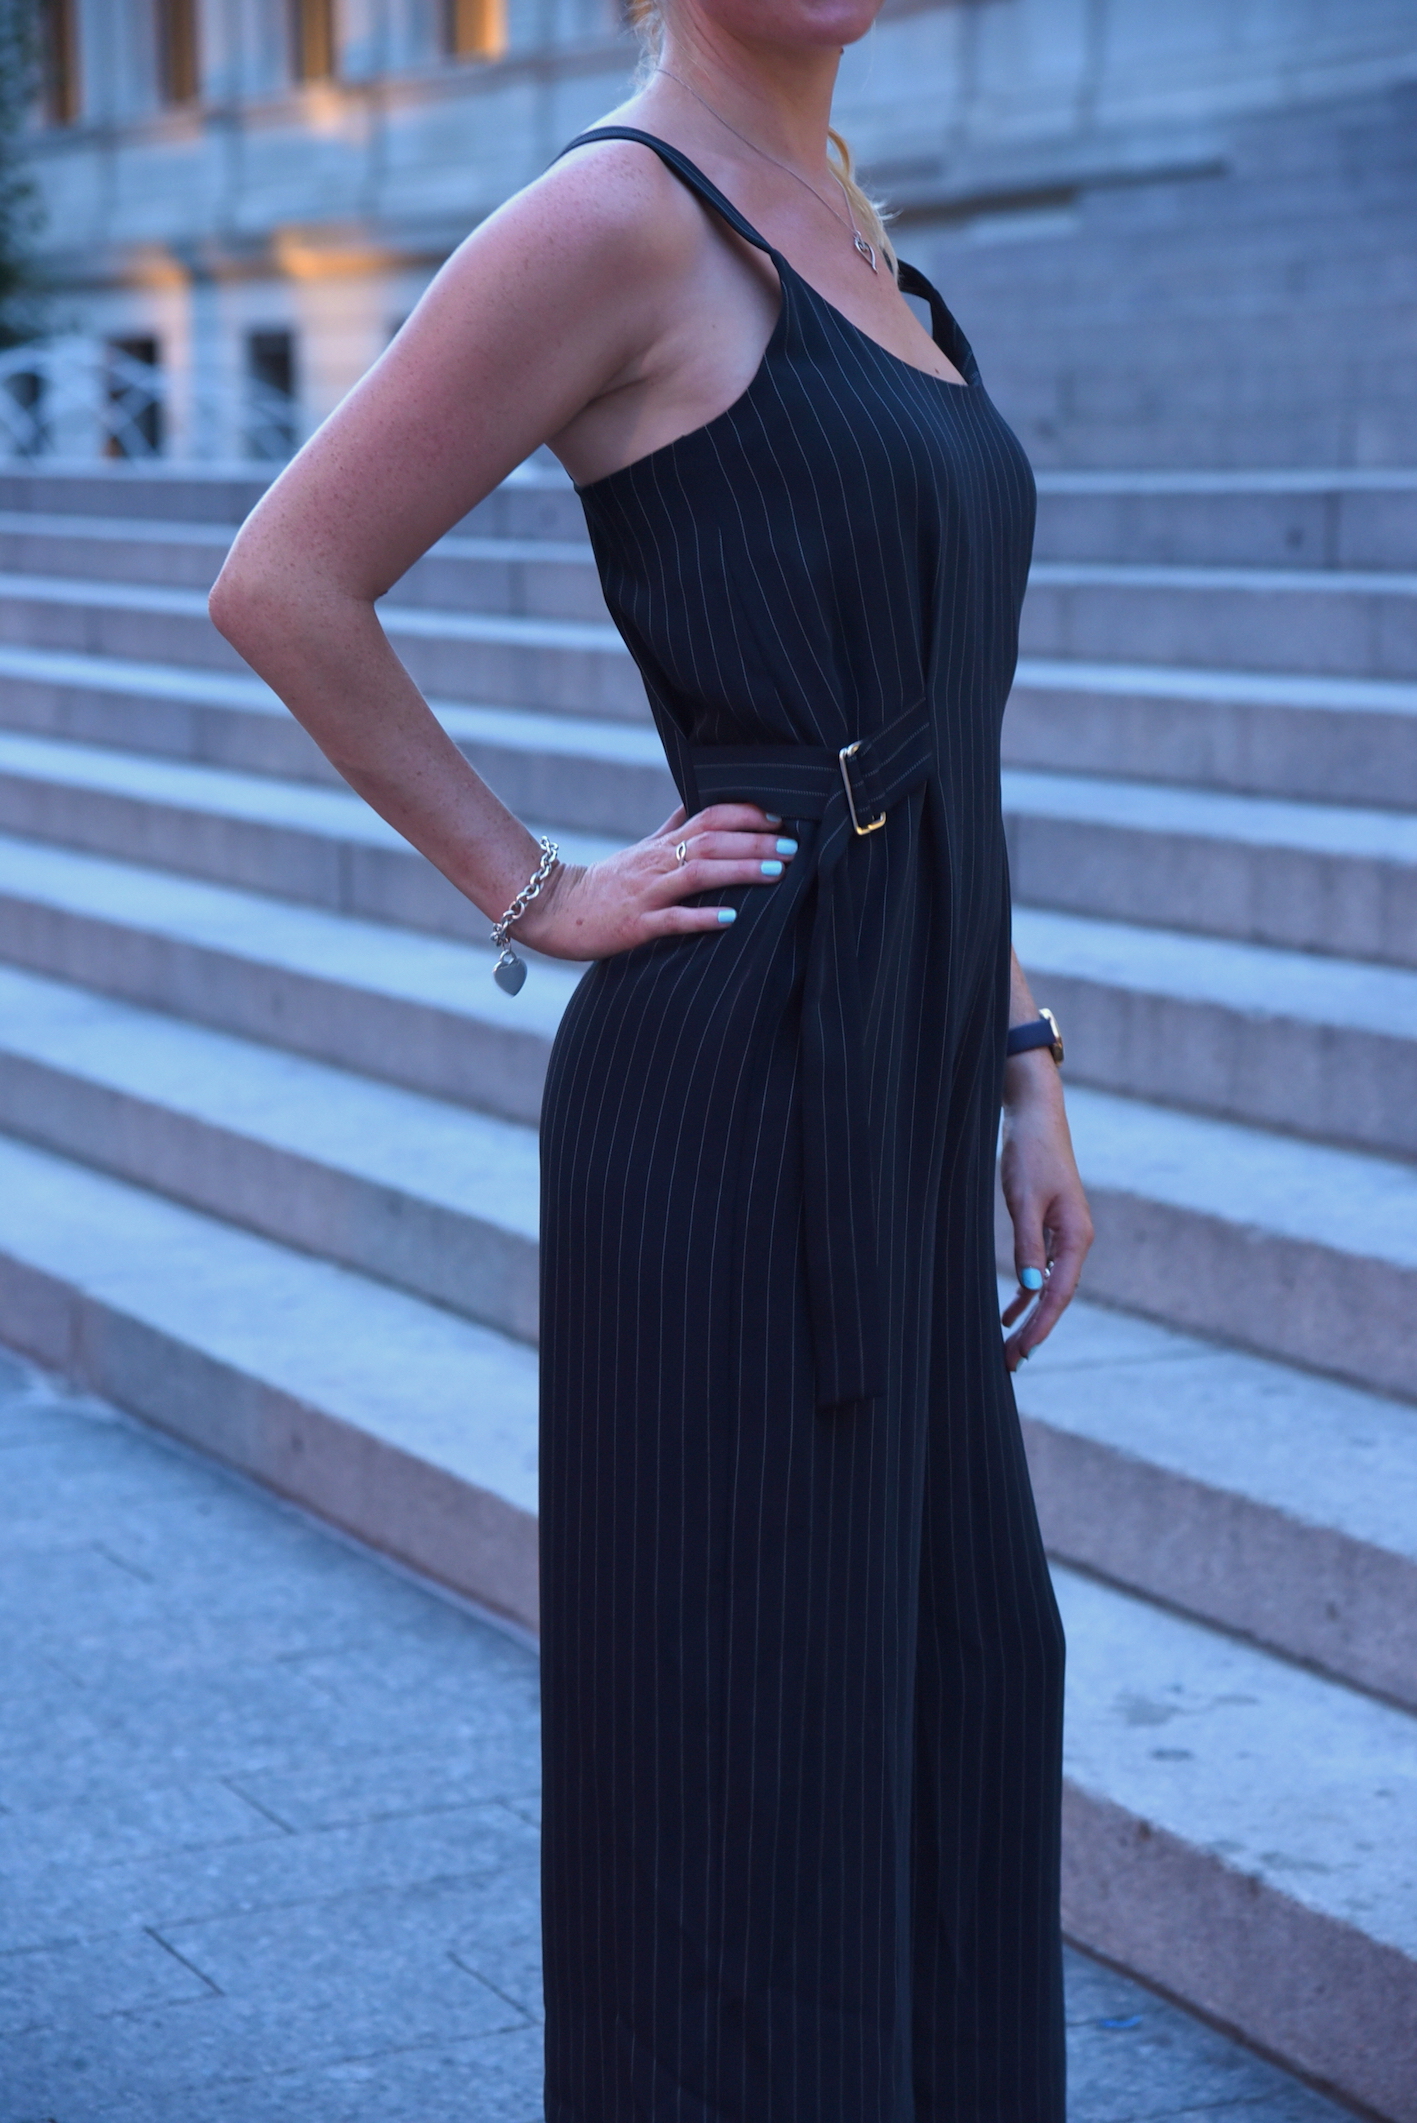 Topshop style jumpsuit fashion blogger look new york city